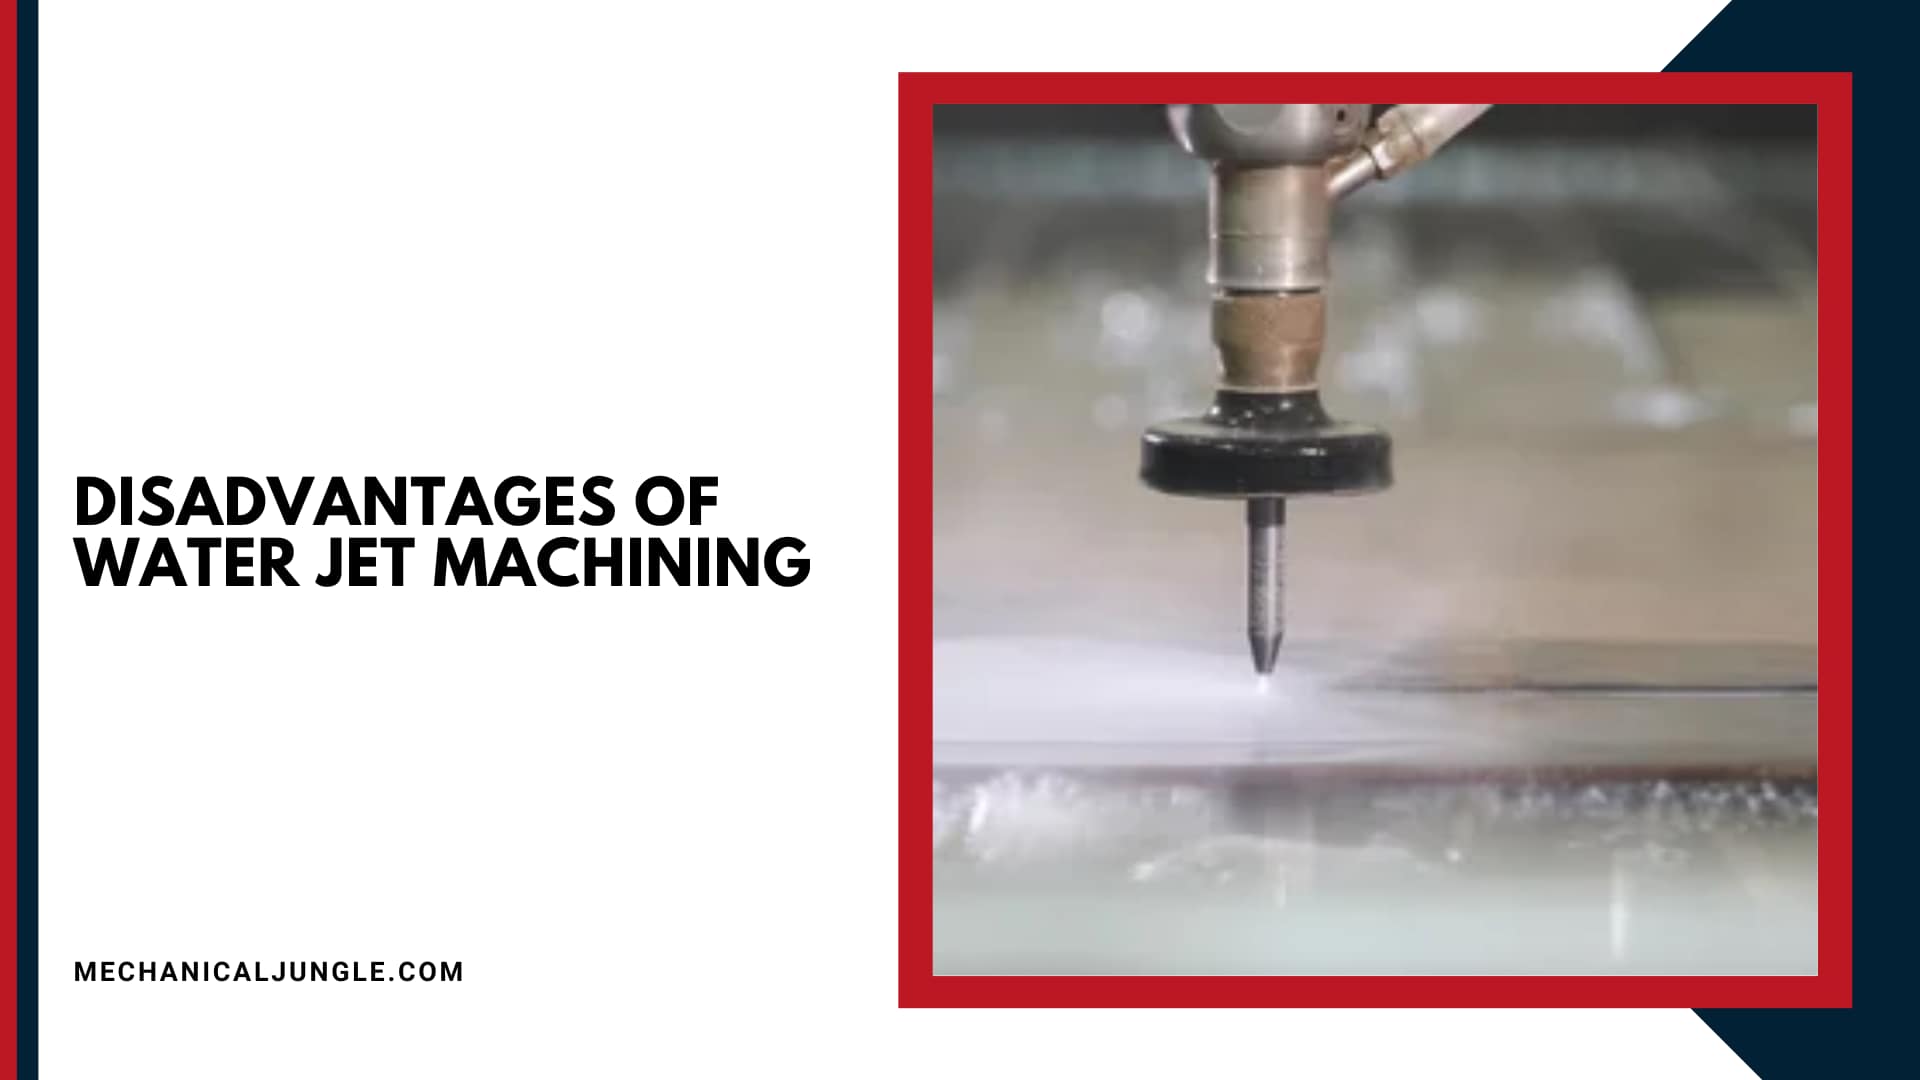 Disadvantages of Water Jet Machining